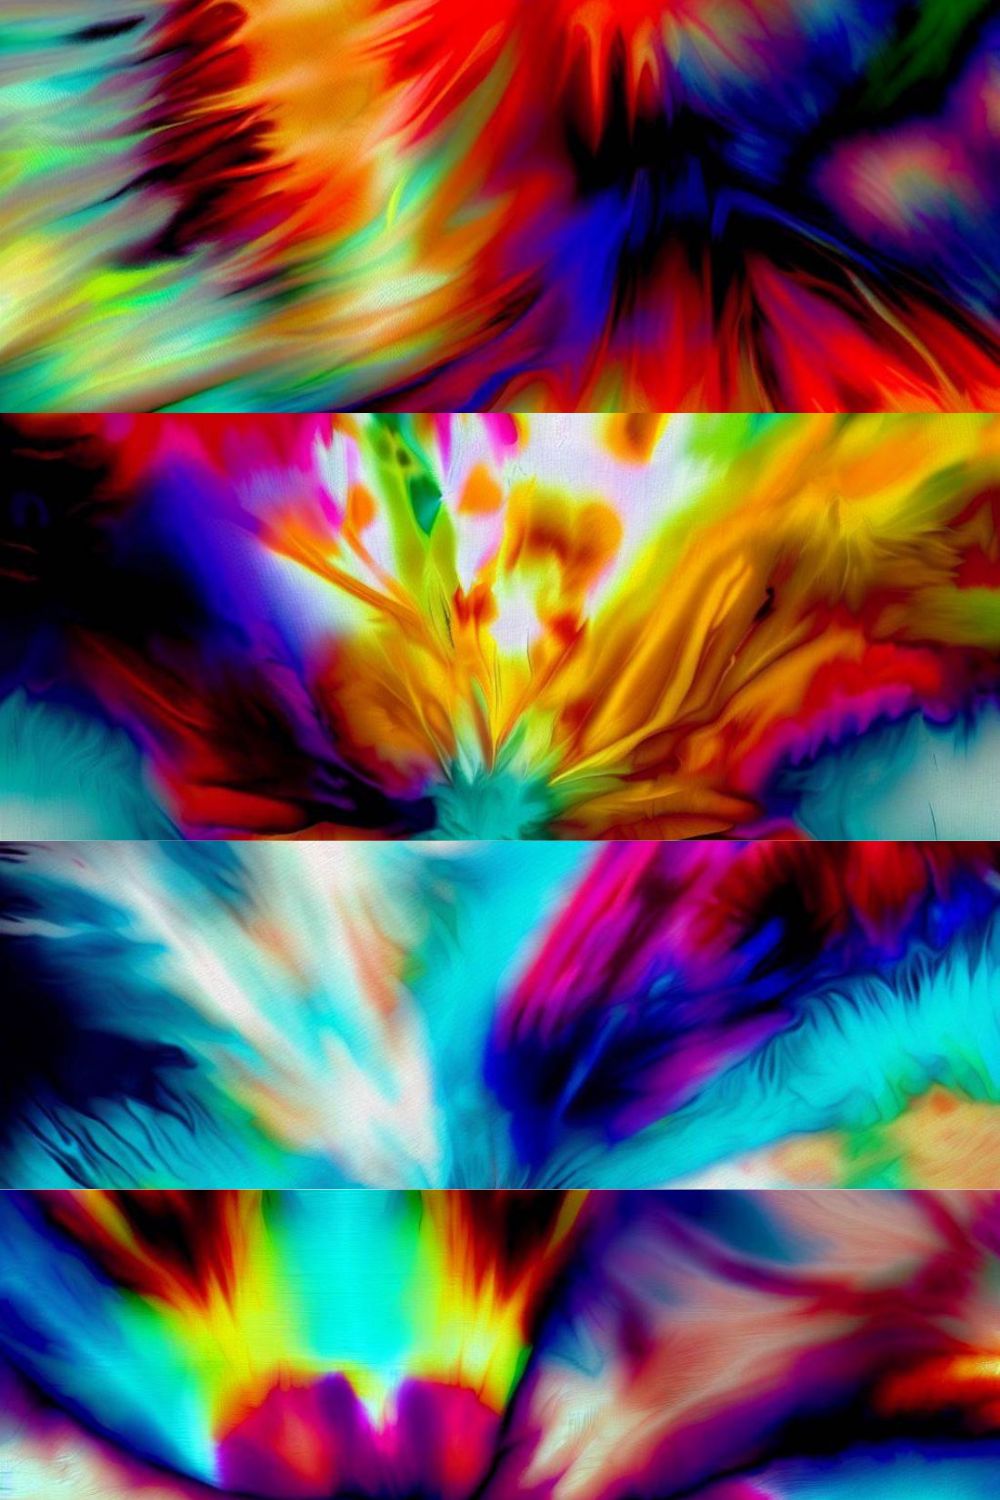 4 Tie dye psychedelic background images in the colour combination  orange-blue